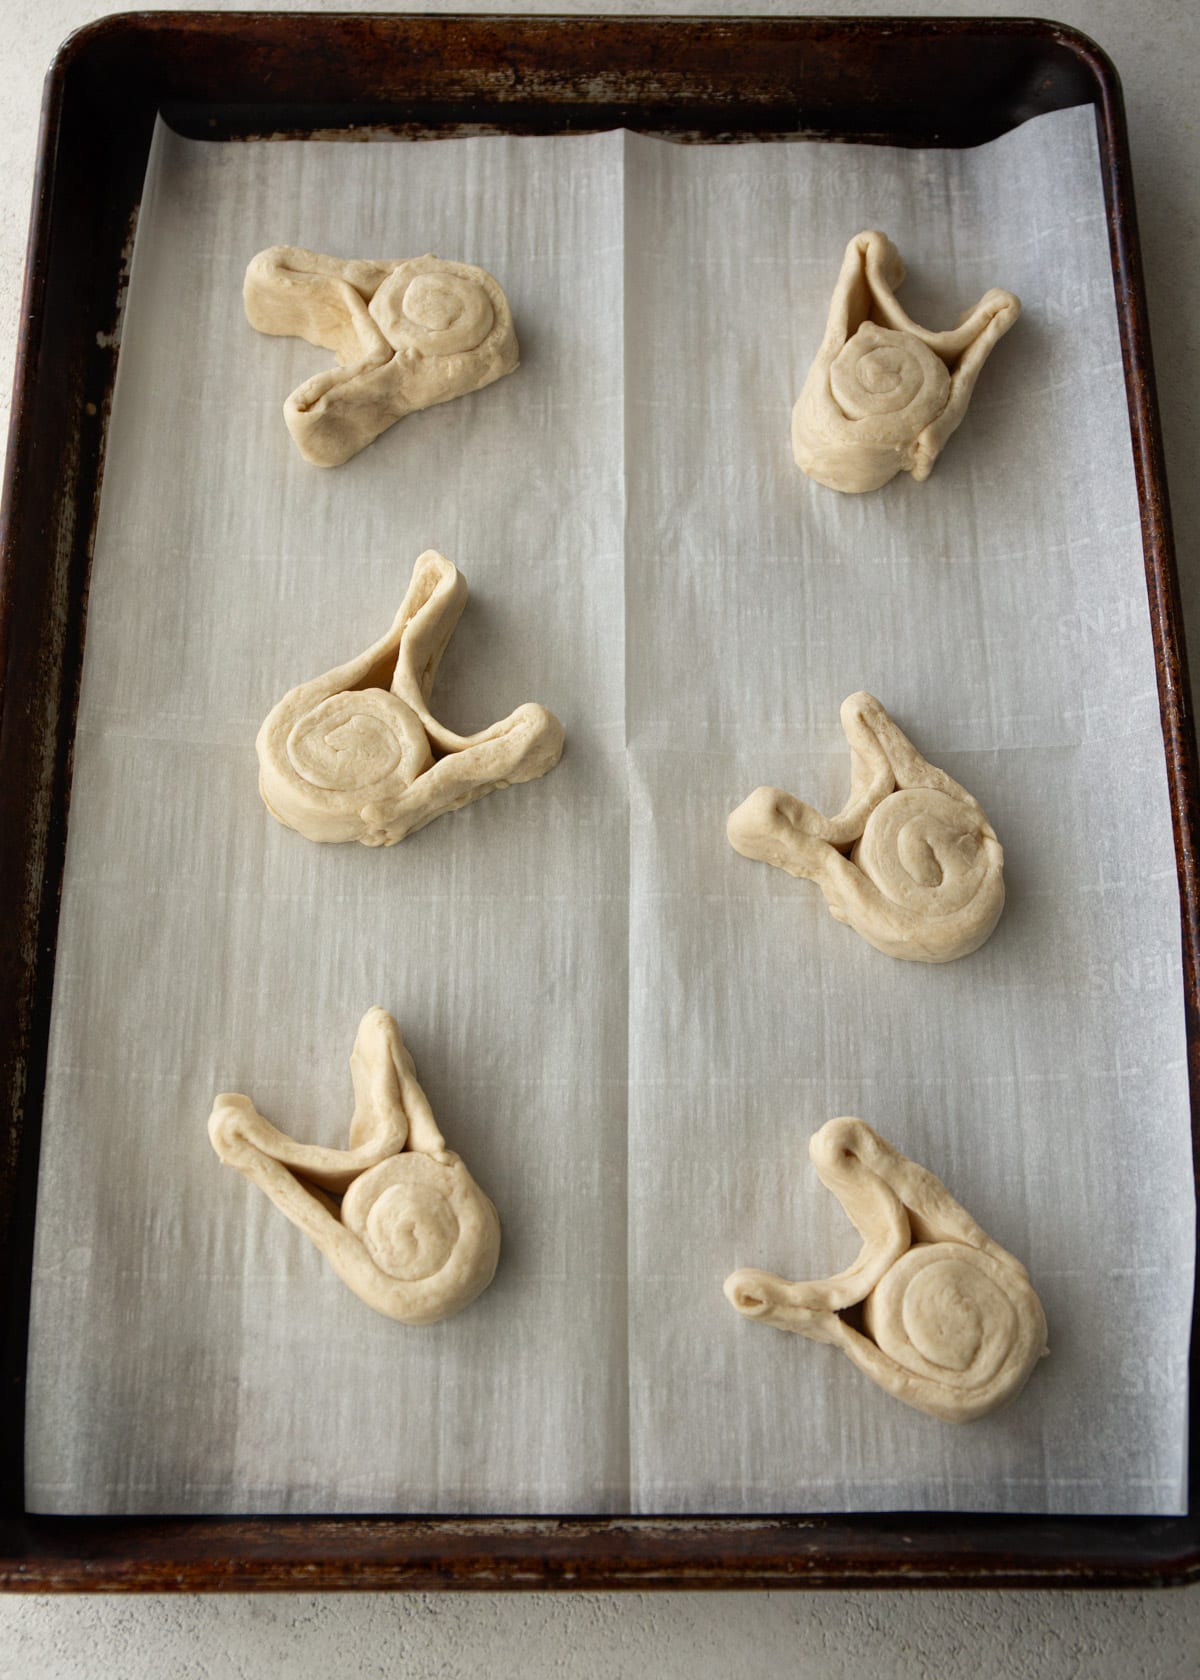 uncooked bunny shaped rolls on a parchment lined sheet pan